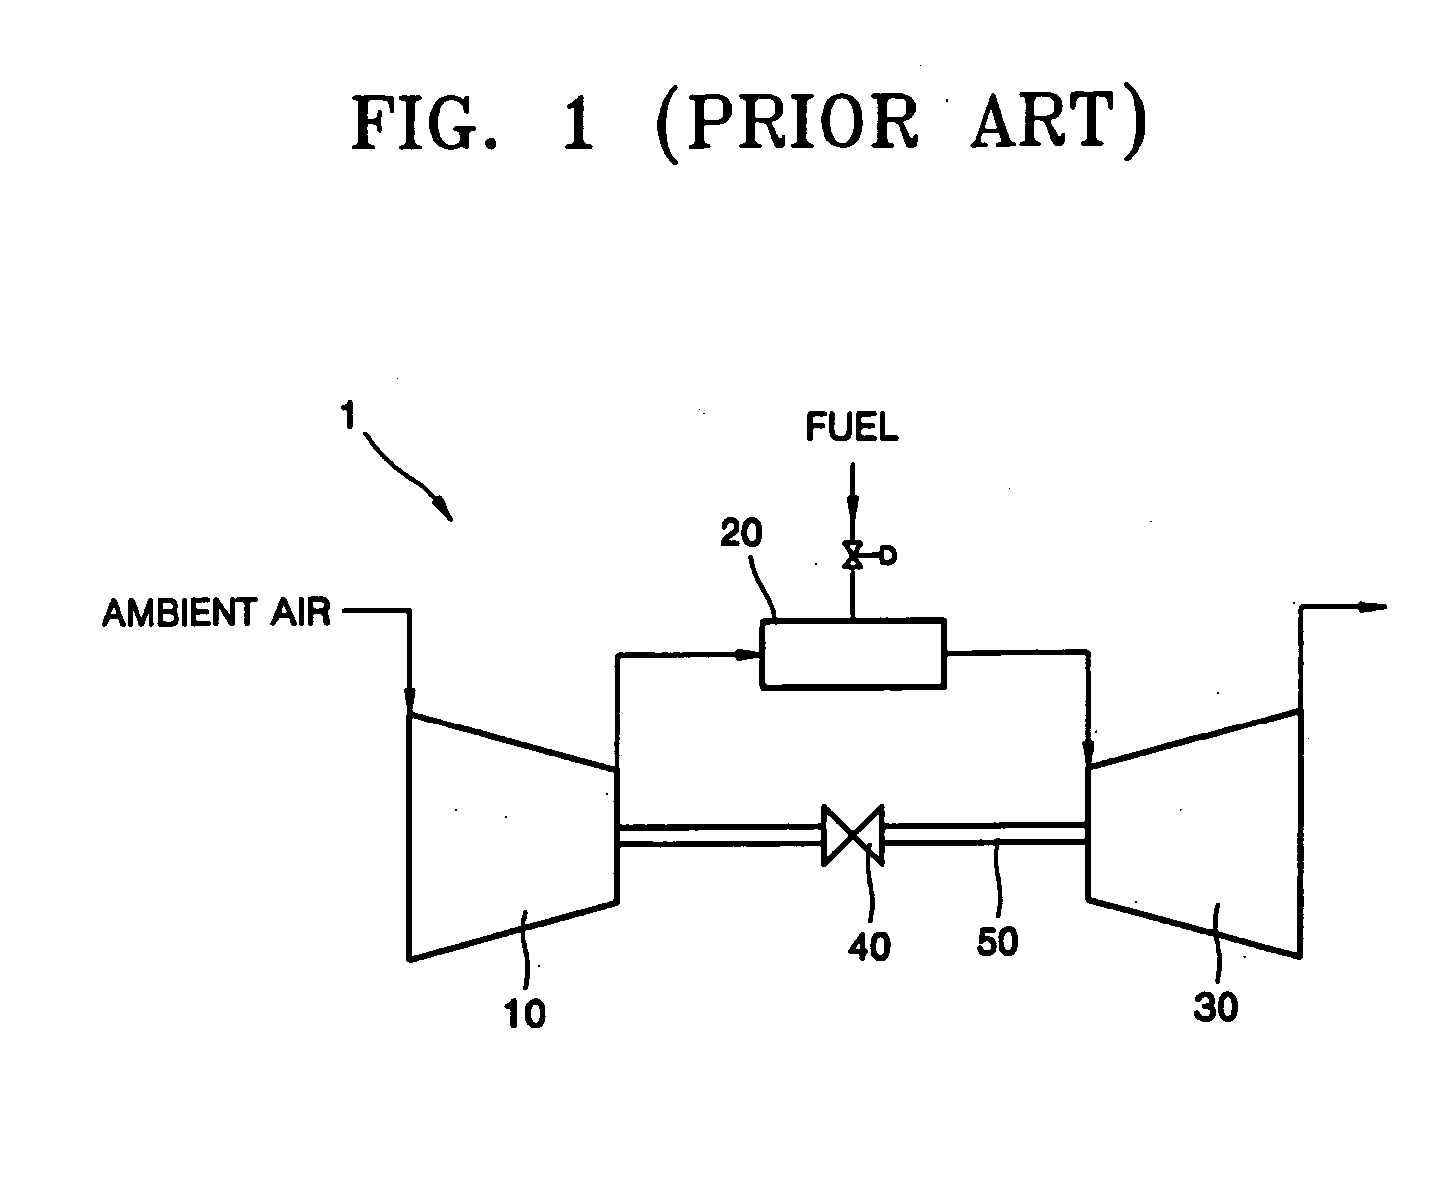 Gas turbine engine with seal assembly